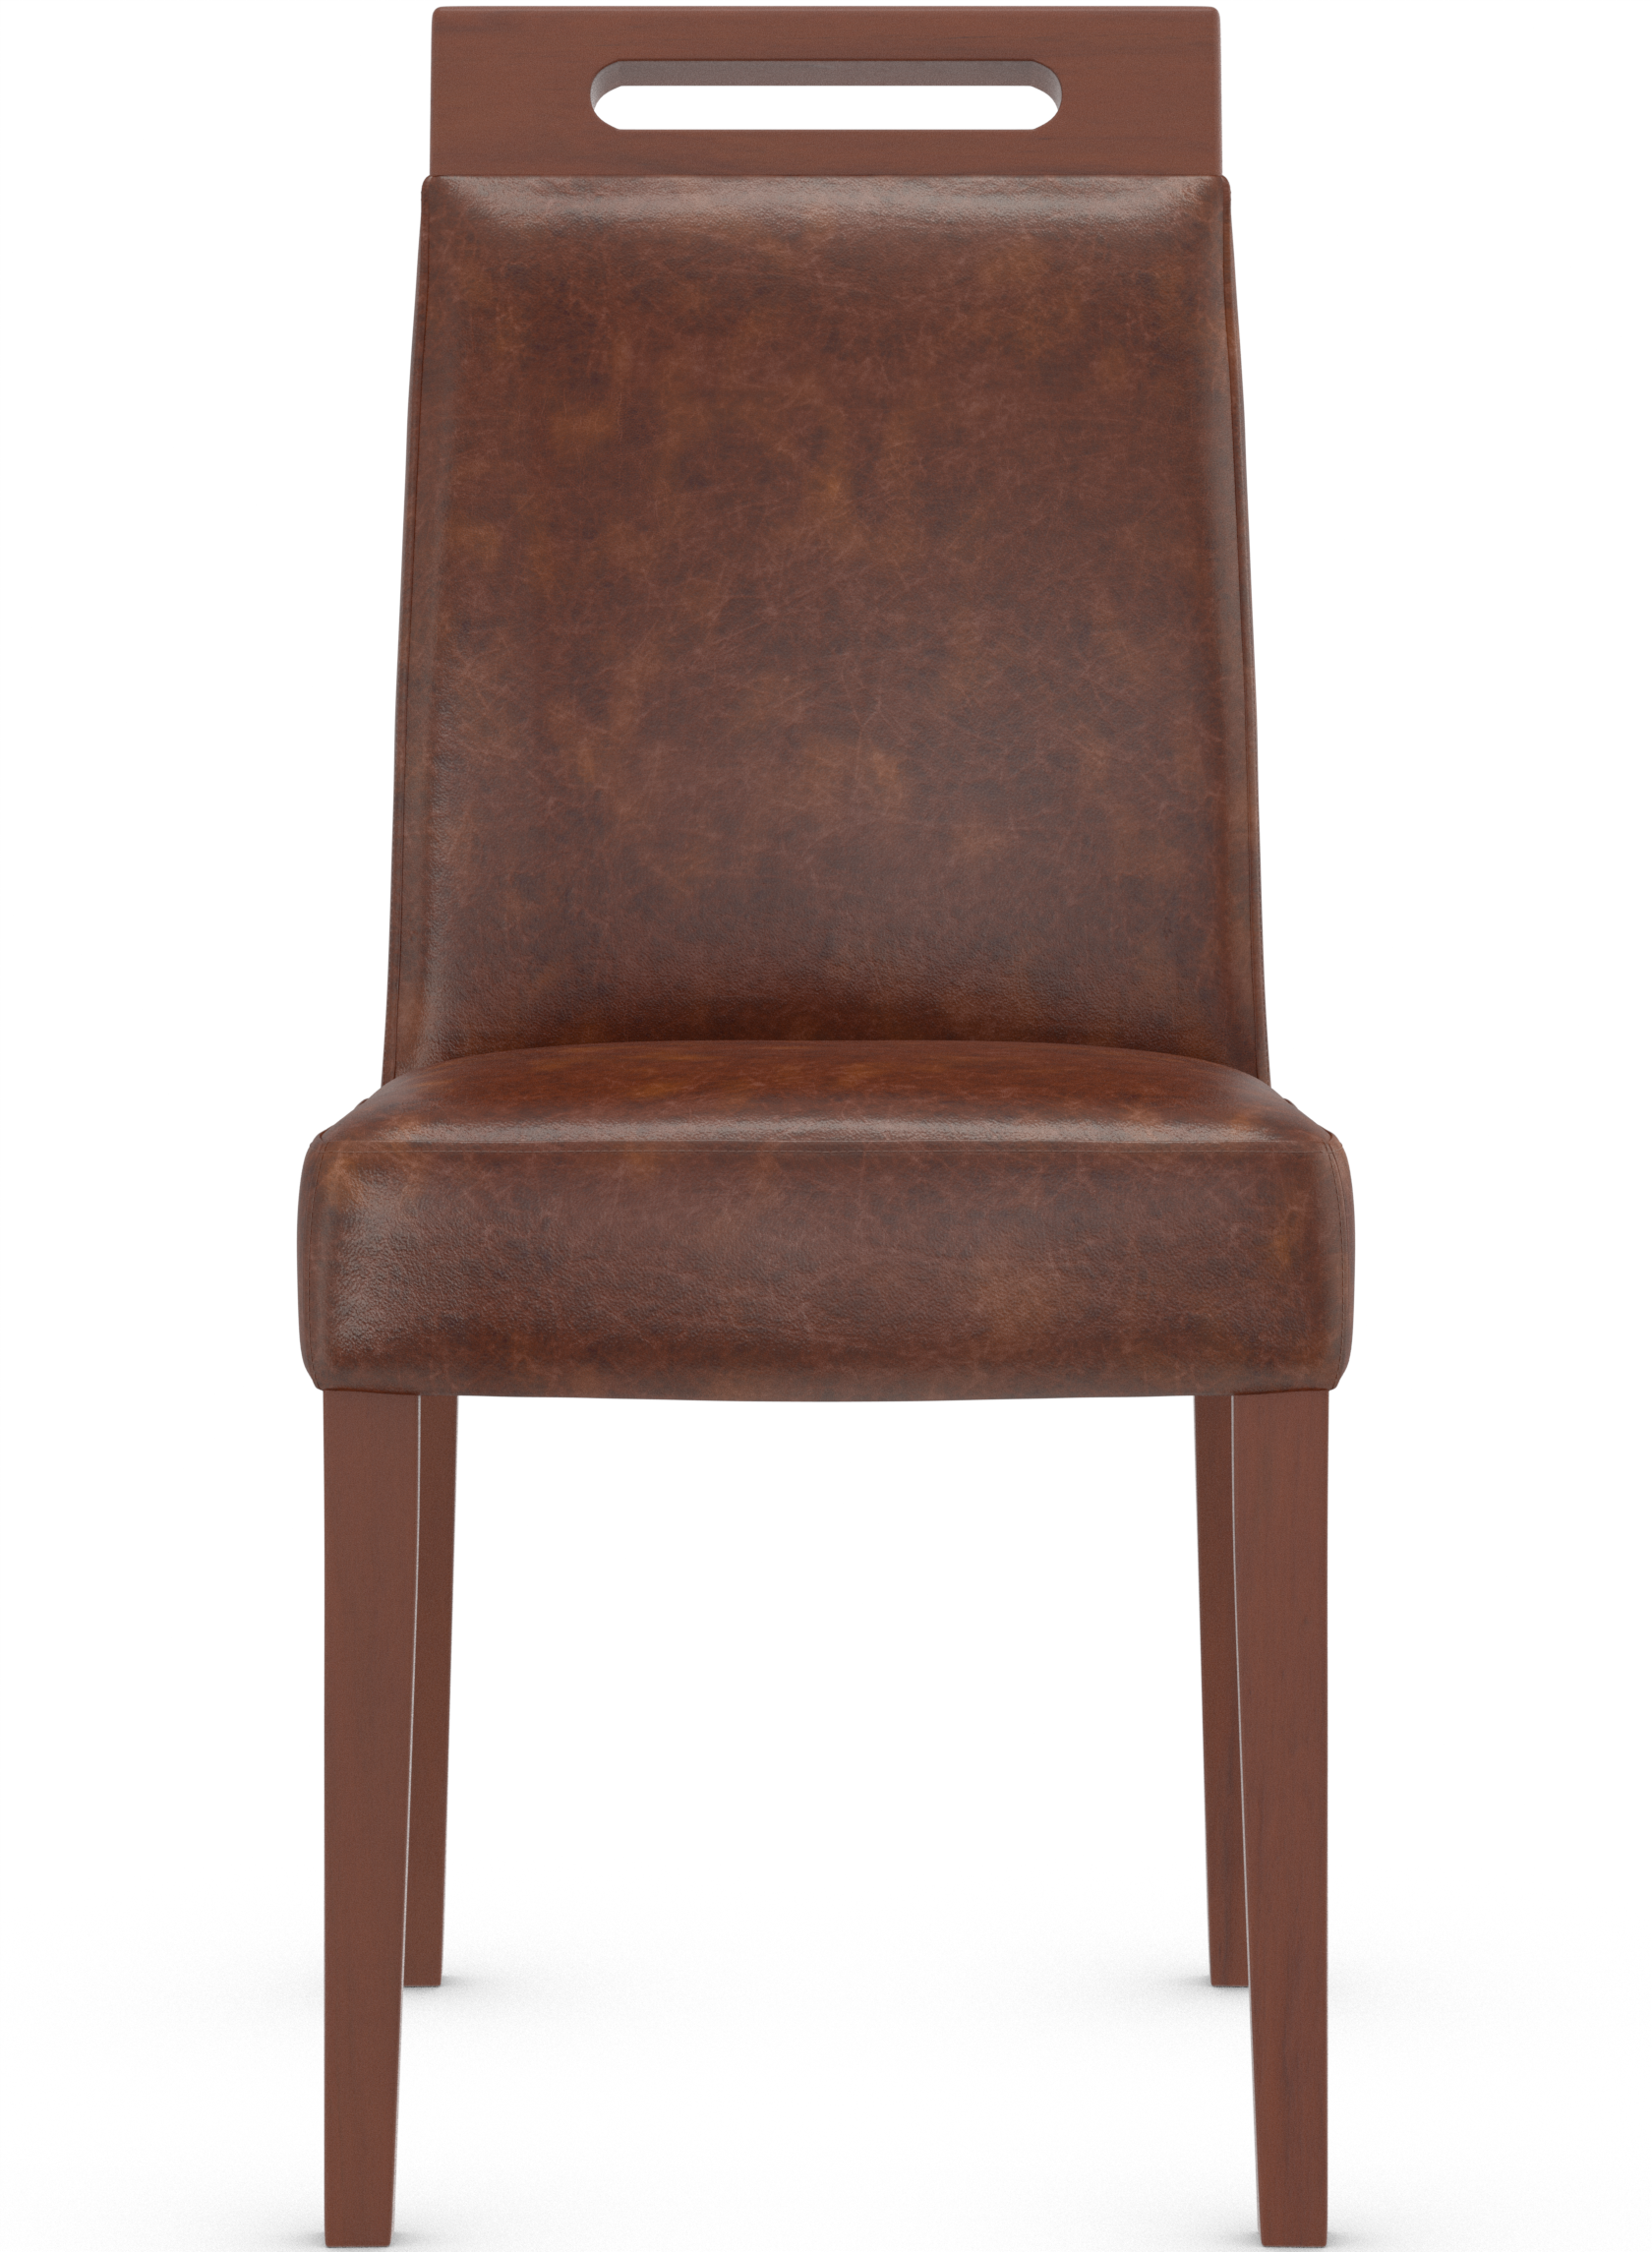 Modena Rustic Oak Dining Chair Bonded Leather